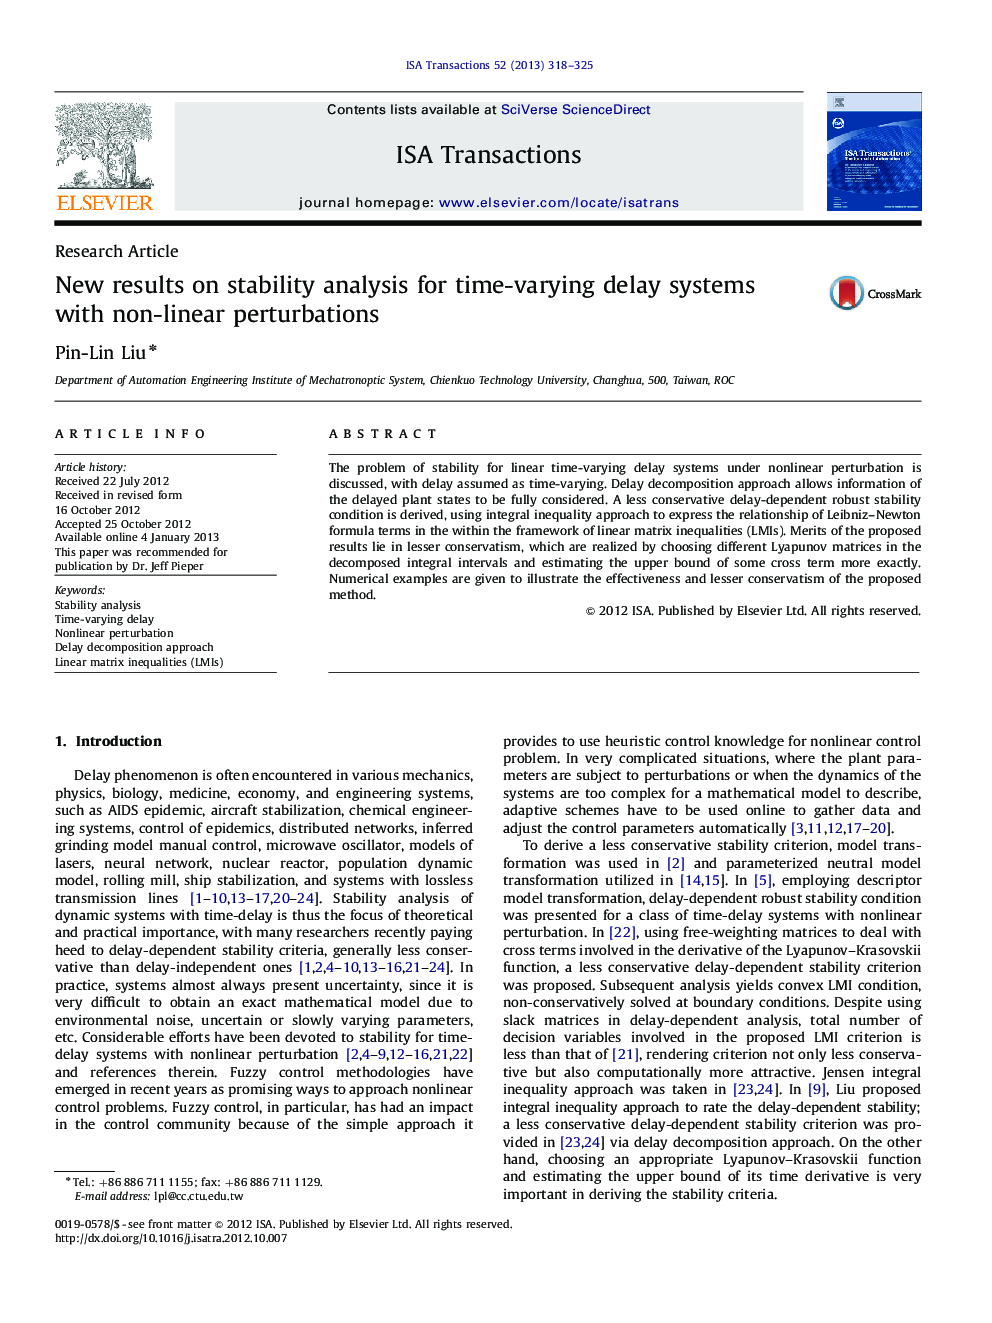 New results on stability analysis for time-varying delay systems with non-linear perturbations